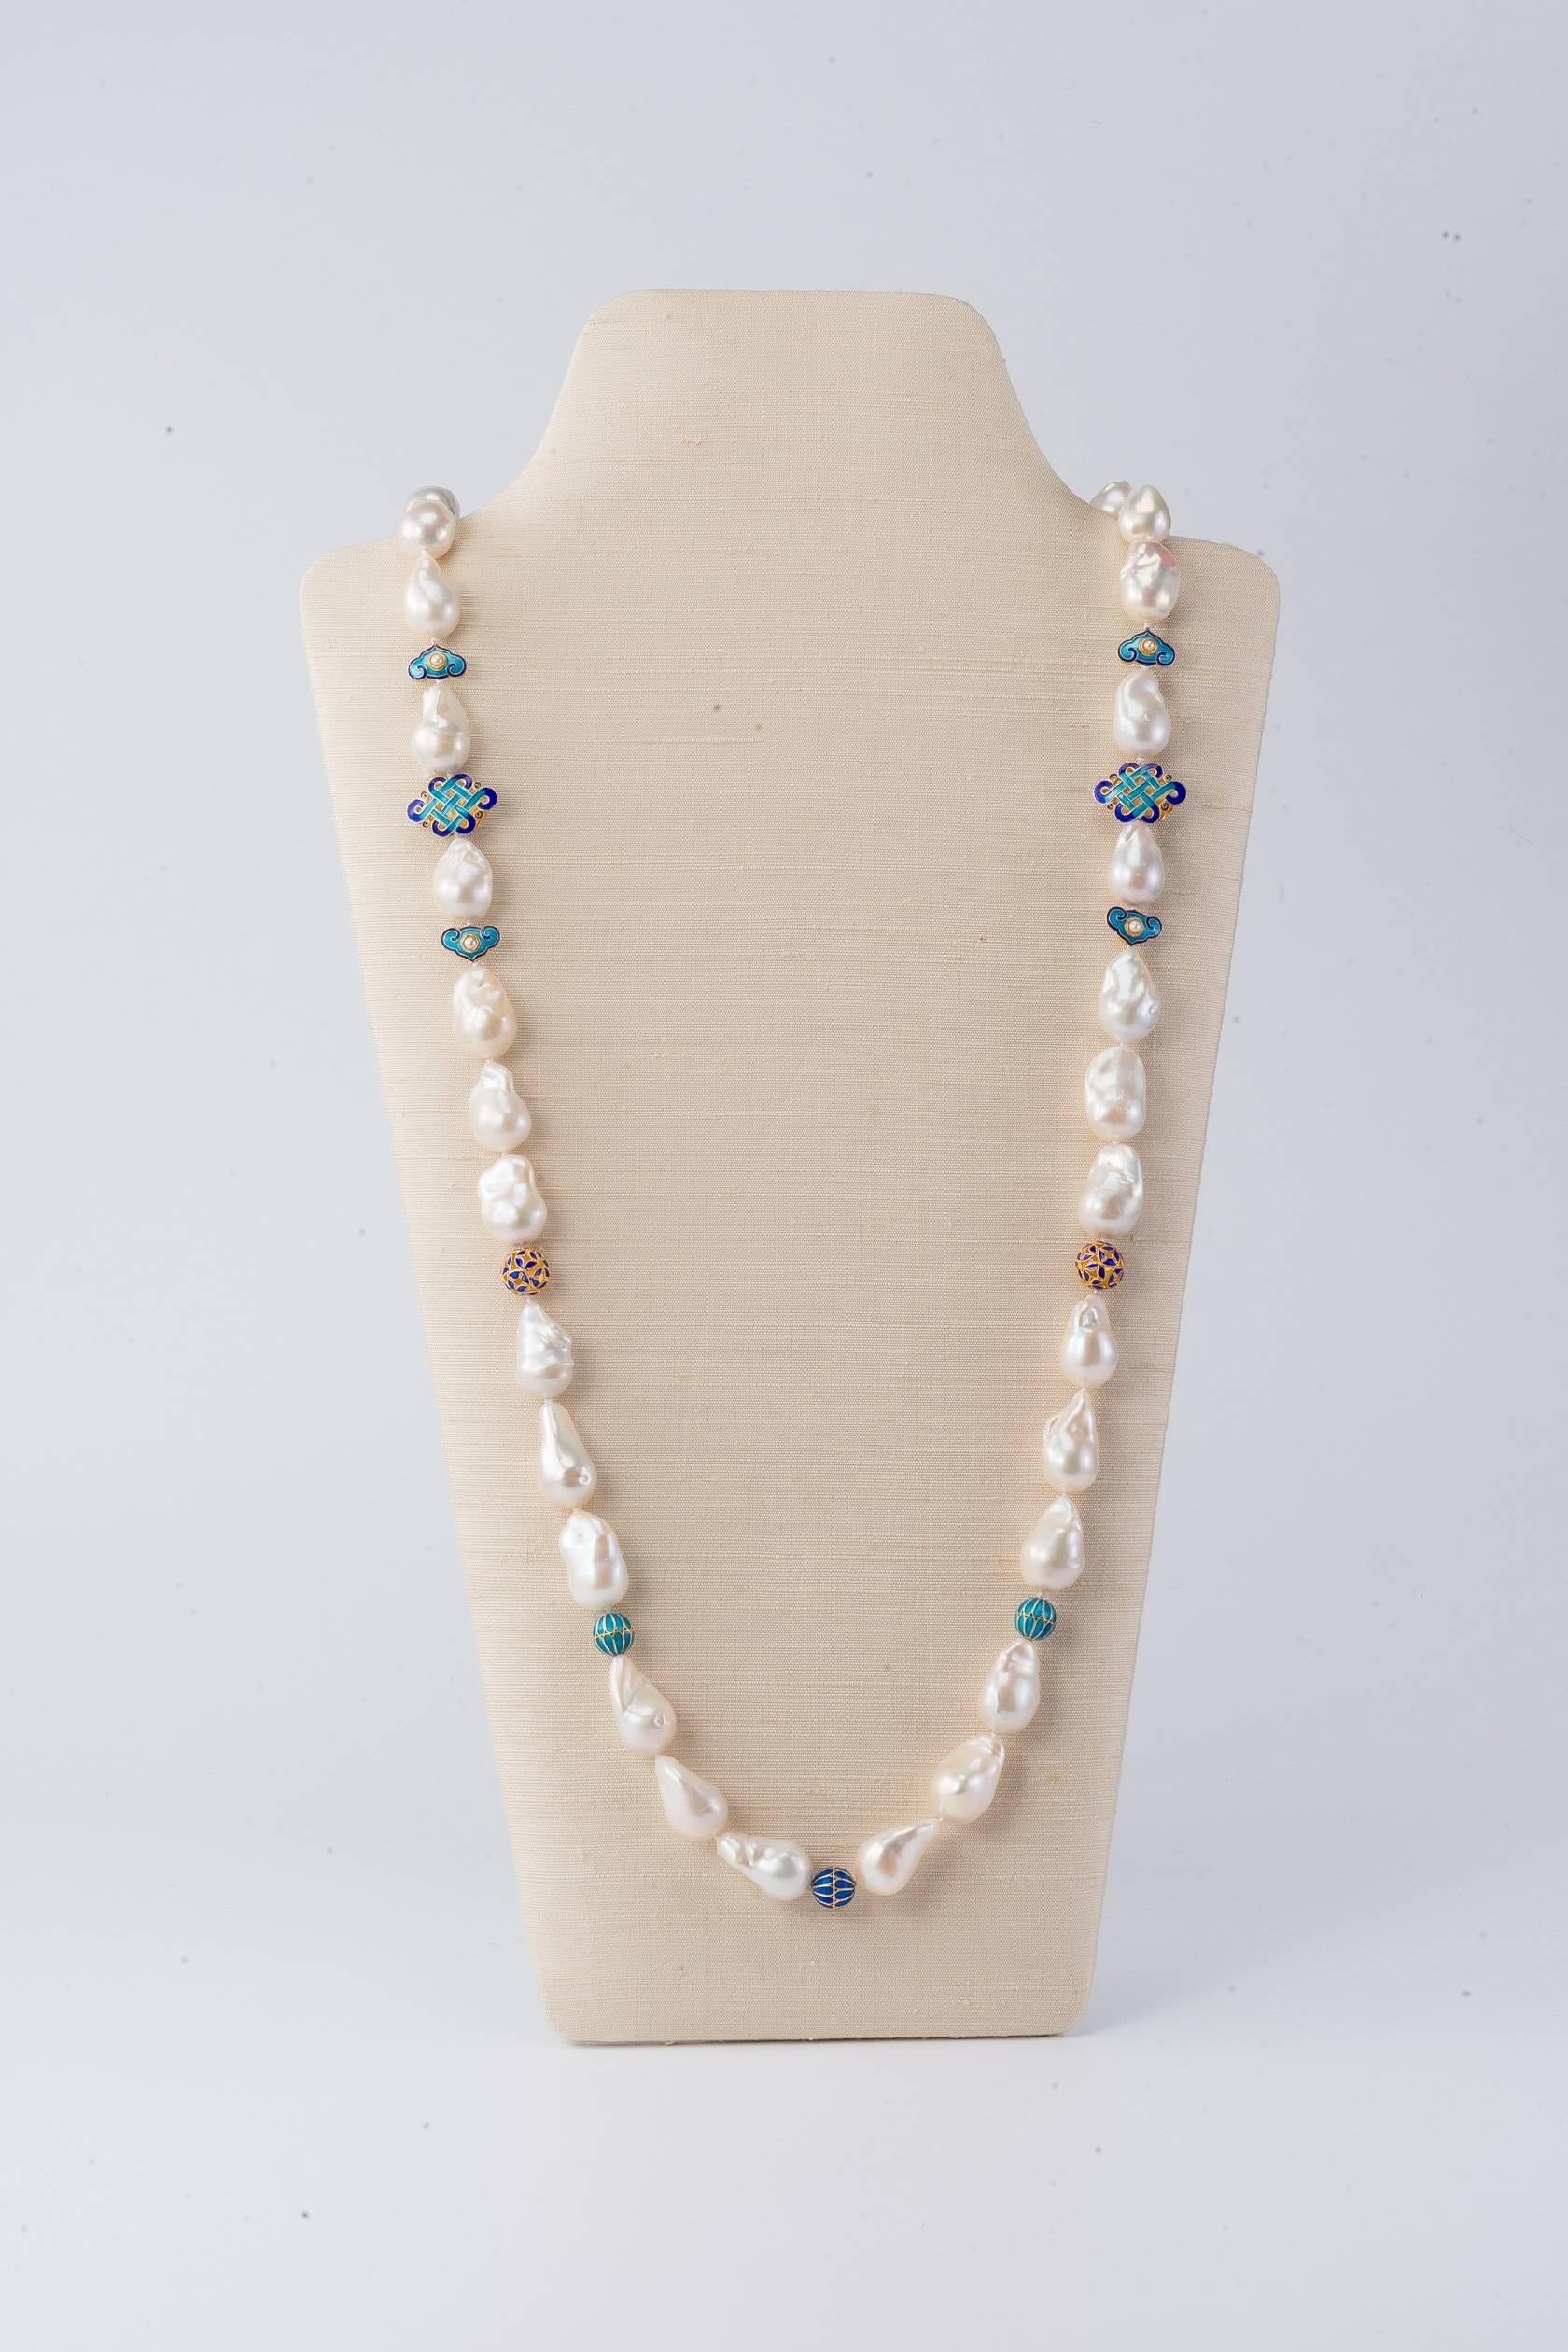 38 in (96.5cm) long necklace with baroque freshwater pearls

For those of us who love Chinoiserie and blue and white, the exuberantly baroque freshwater pearls are highlighted in a mix of cloisonné and vermeil beads, in the form of endless knots